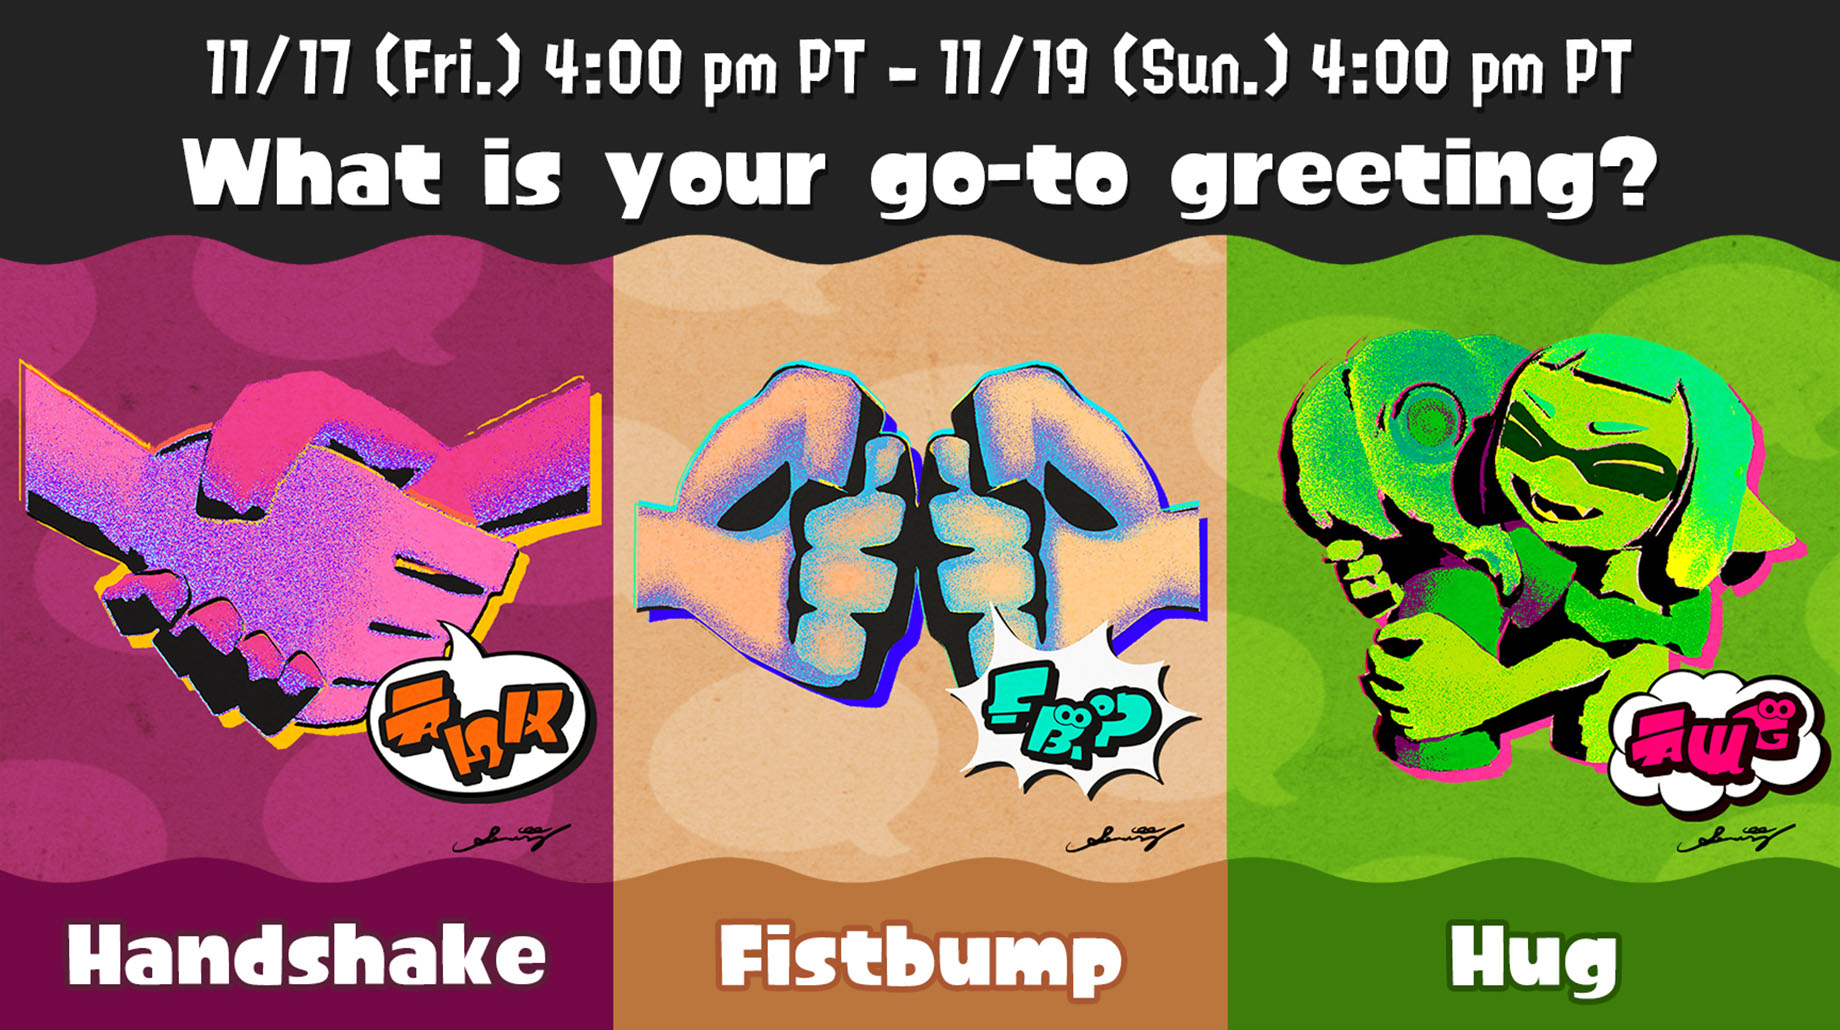 Splatfest signboard - What is your go-to greeting? Handshake, Fistbump, or Hug?